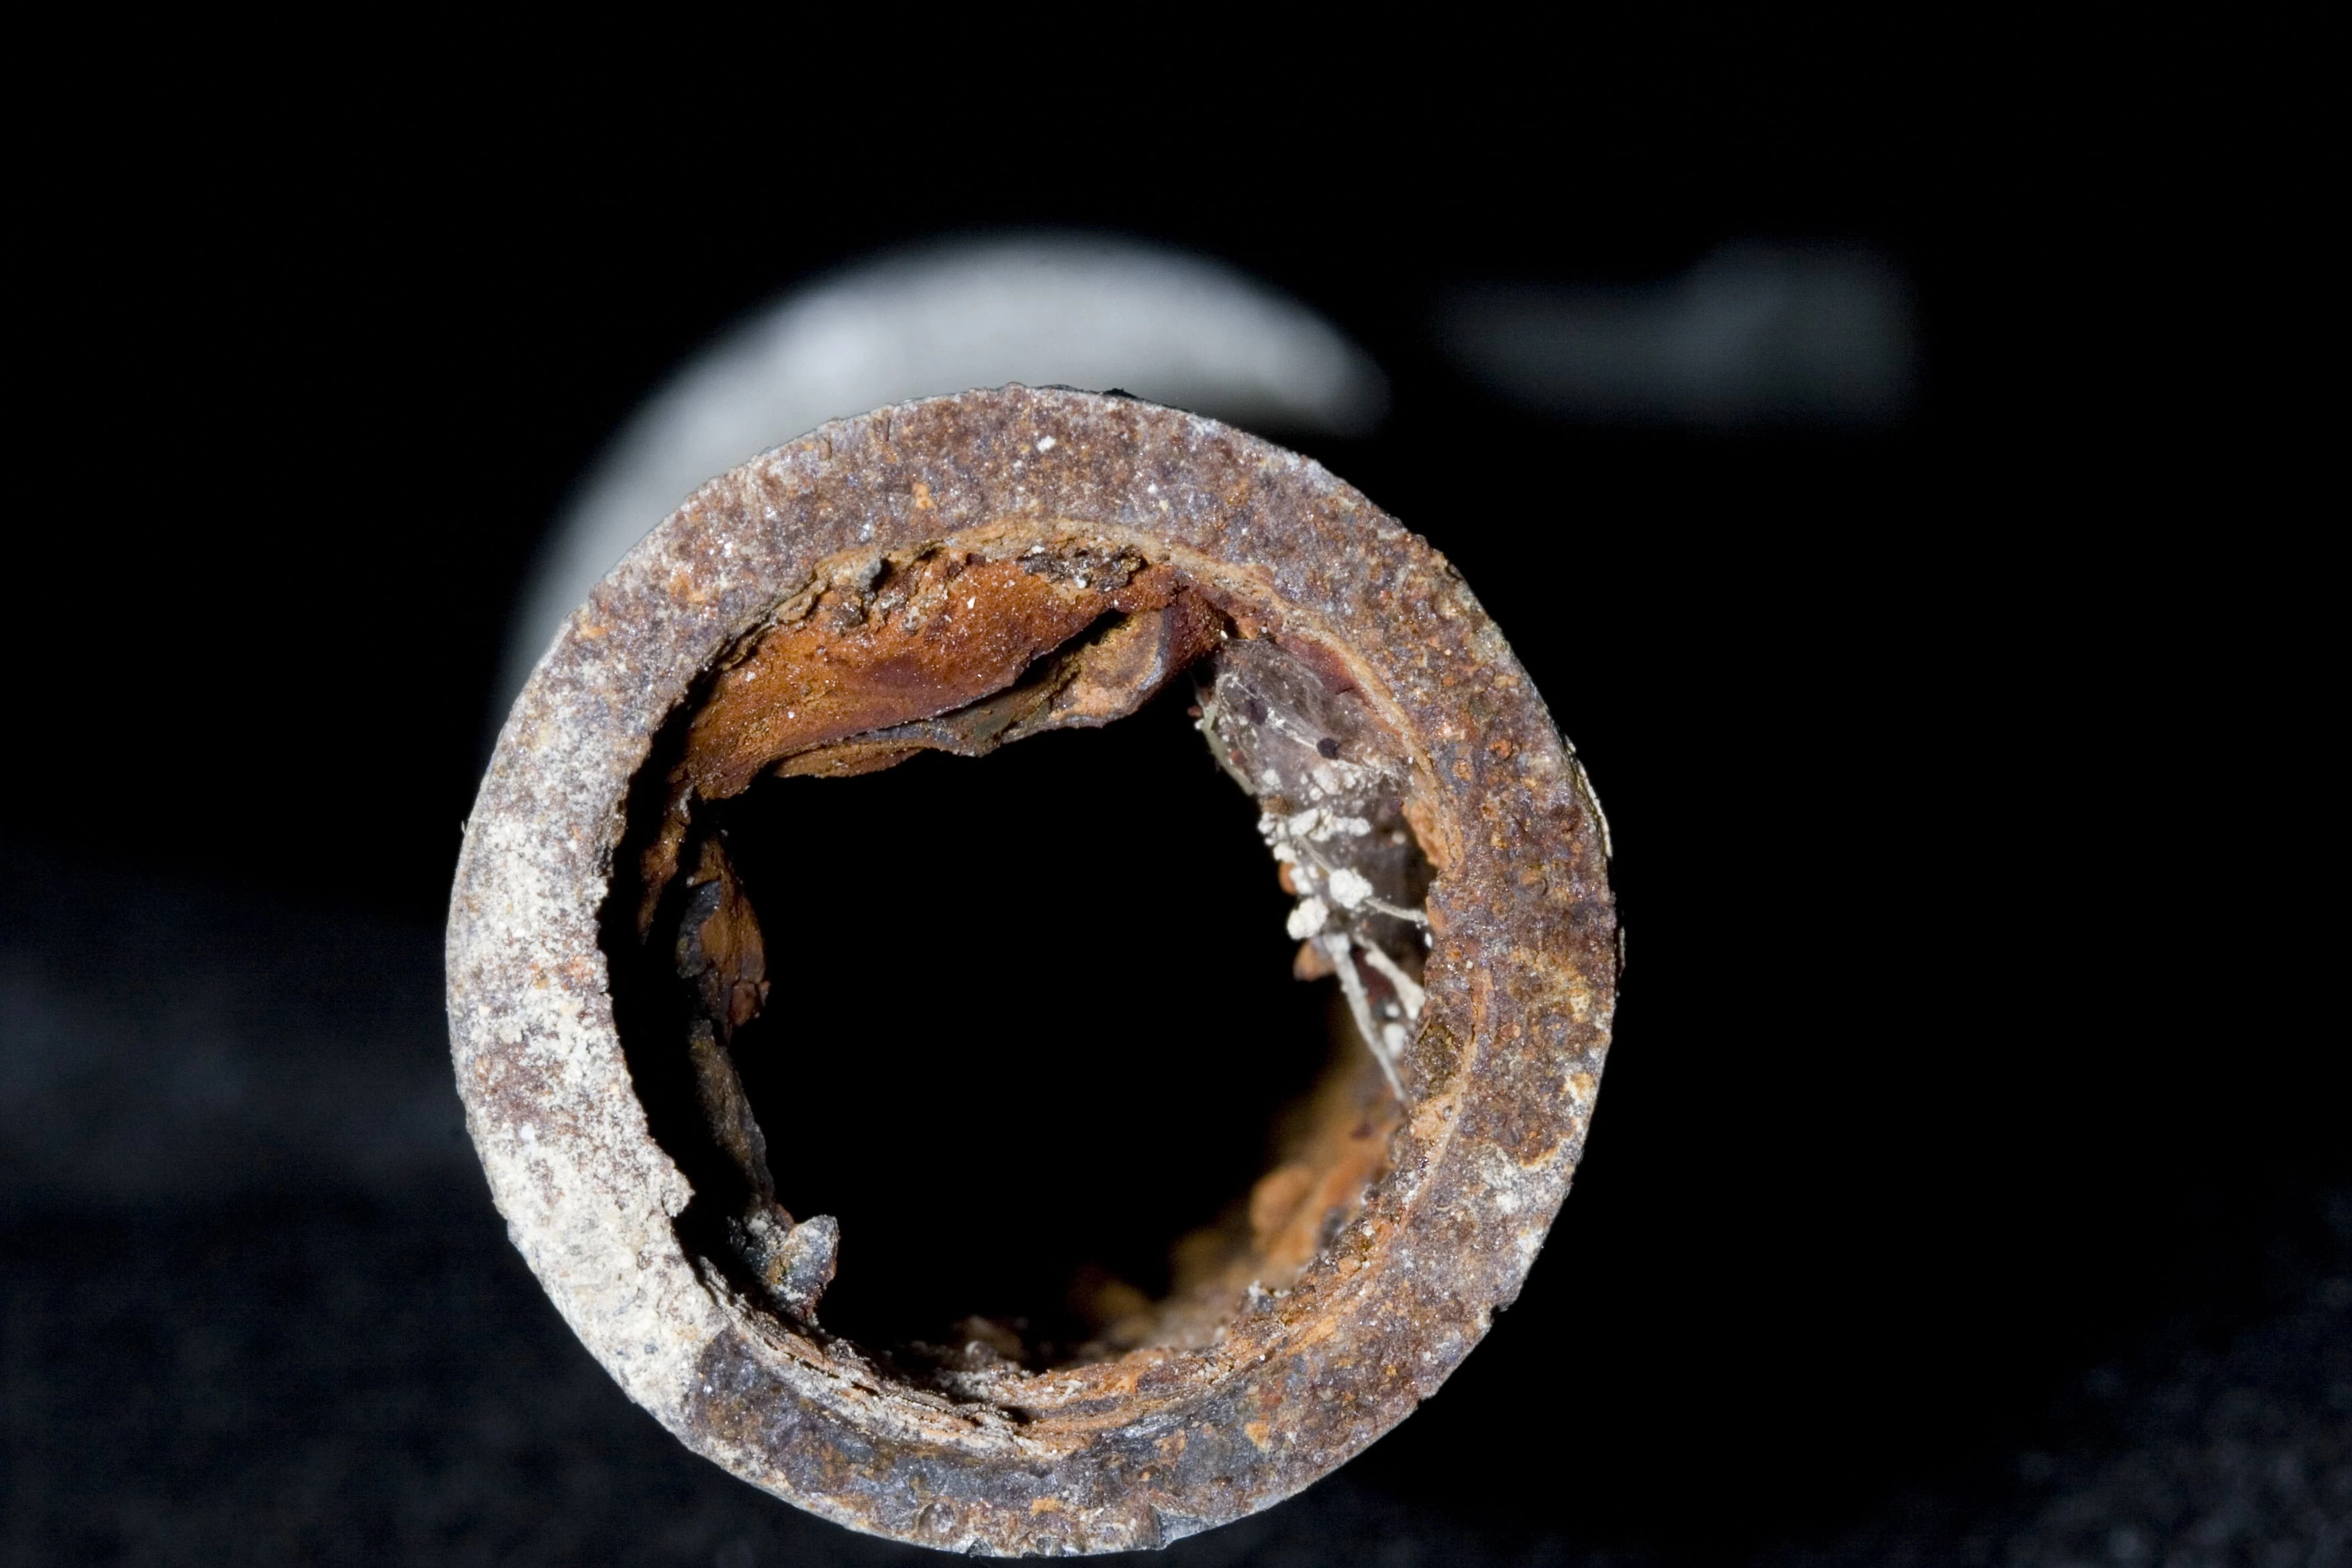 How to Prevent Clogged Pipes and Drains in Older Houses - Dengarden